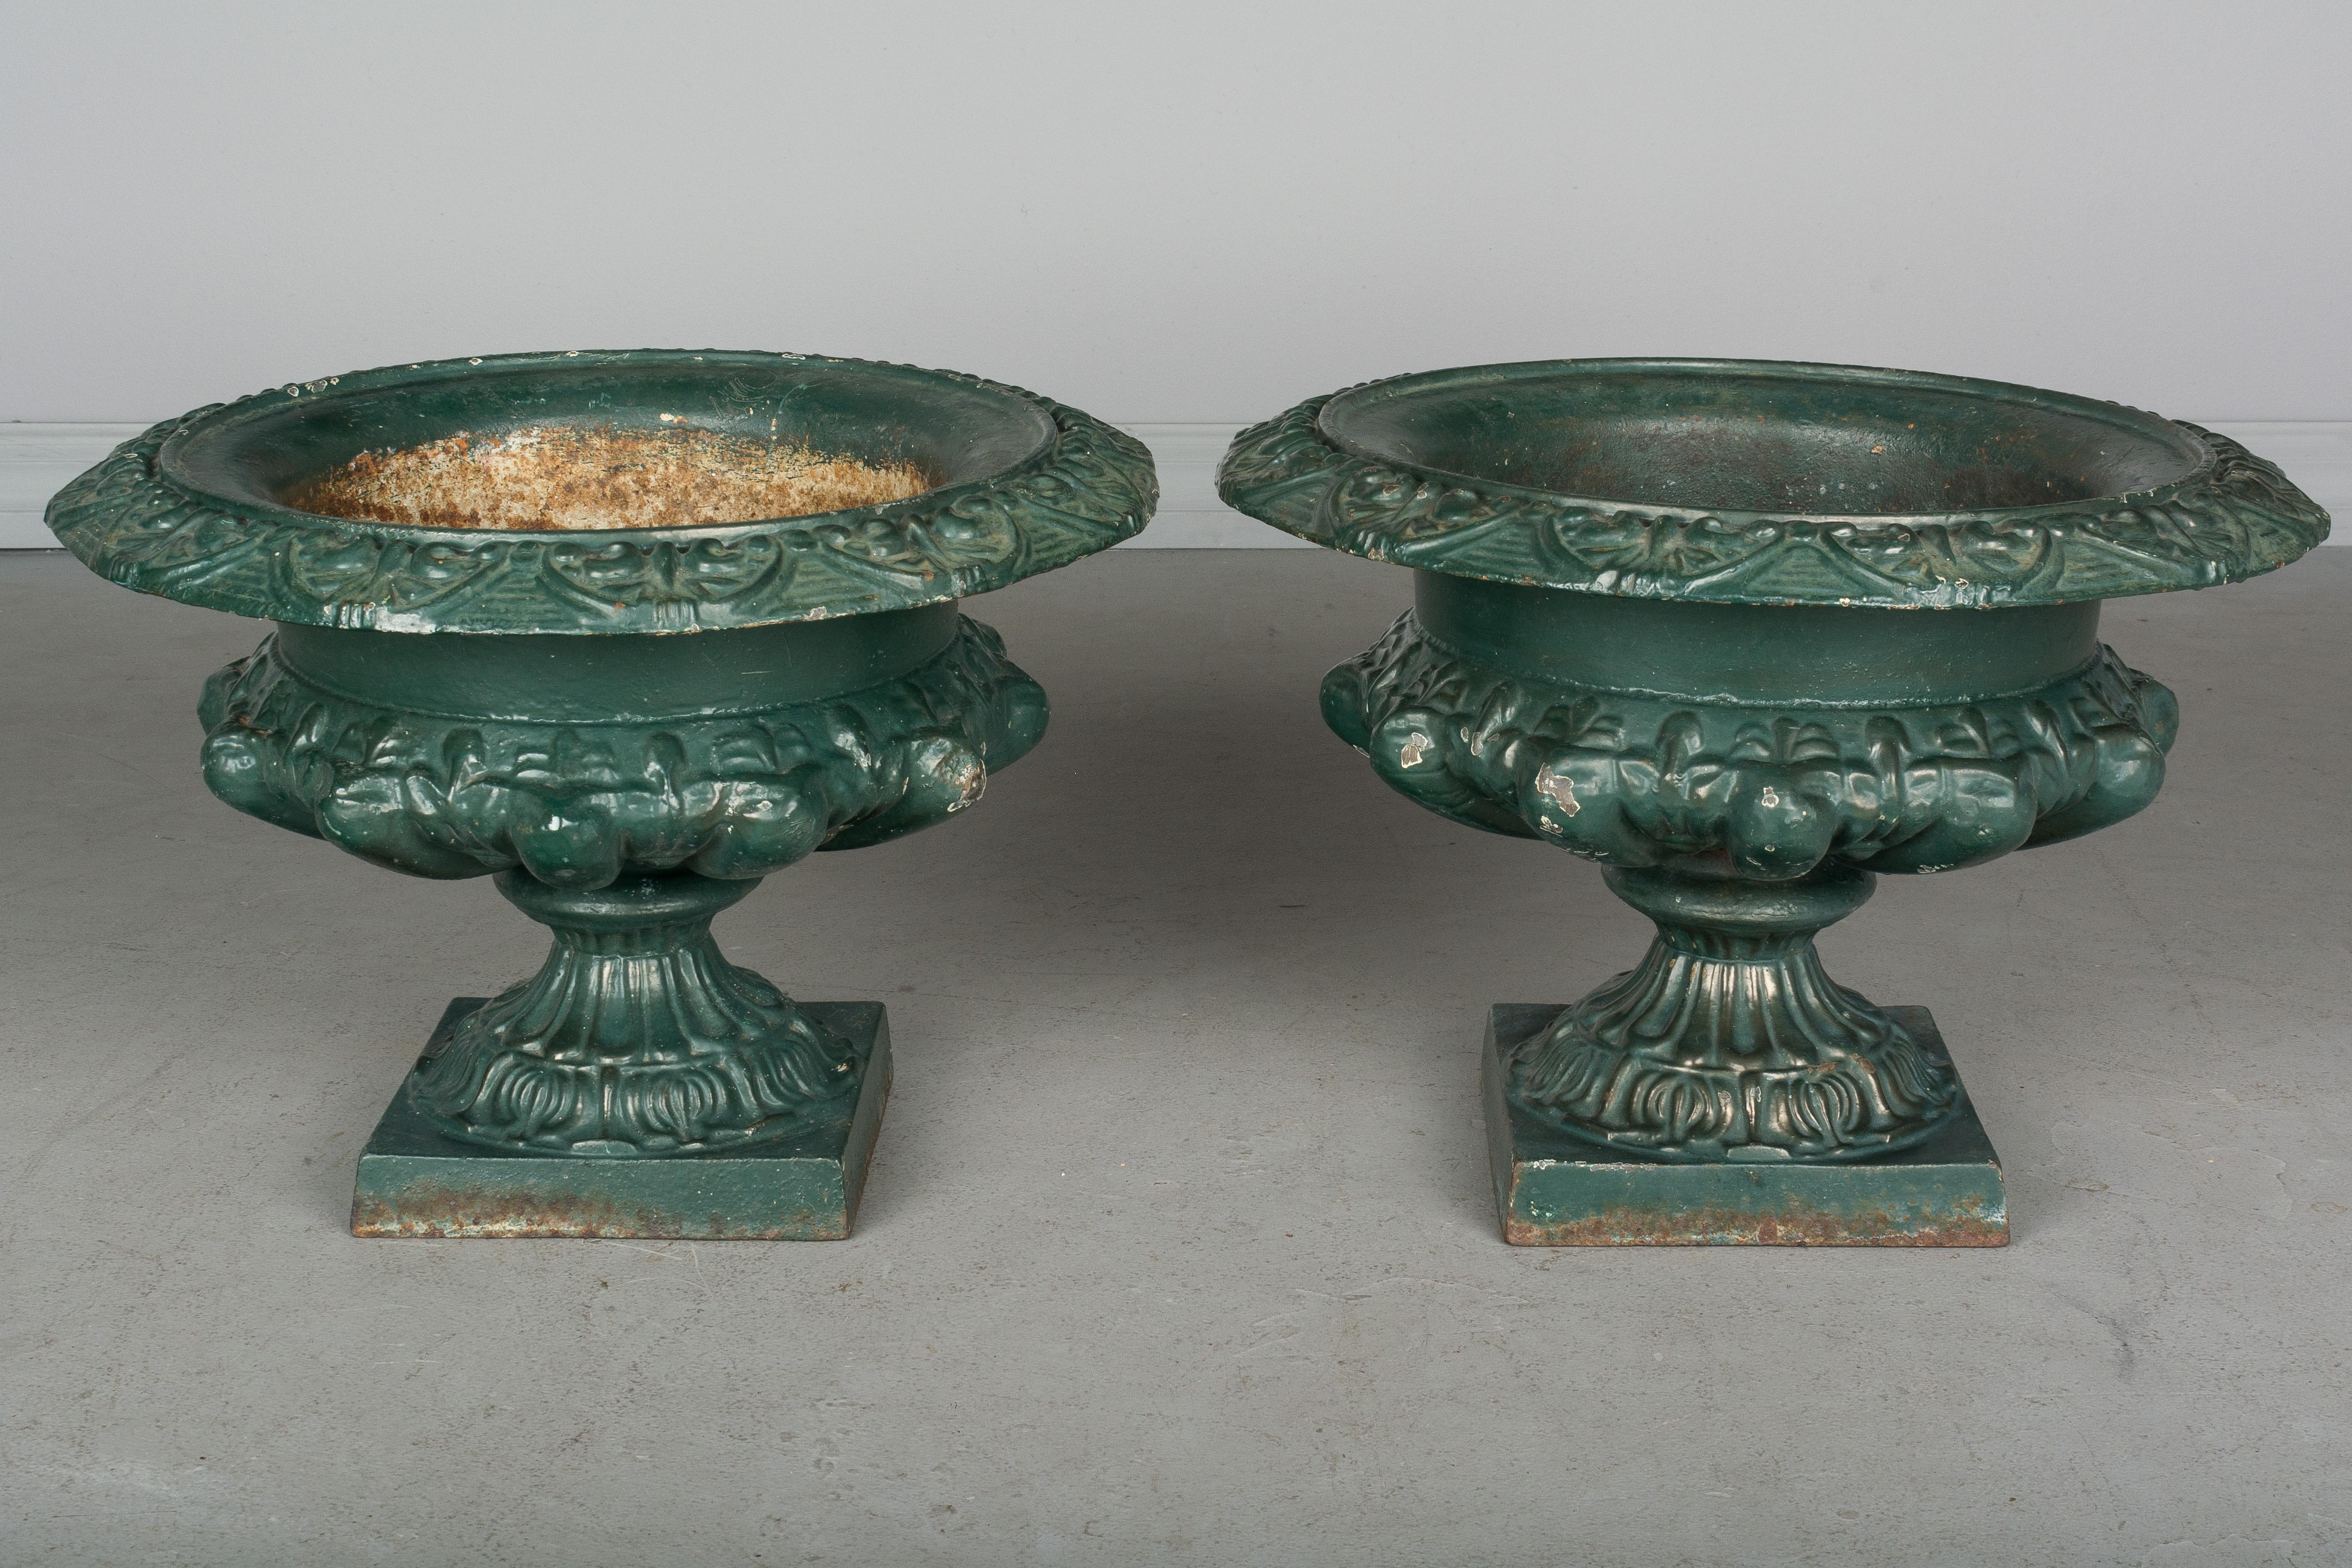 French Provincial Pair of 19th Century French Cast Iron Urns